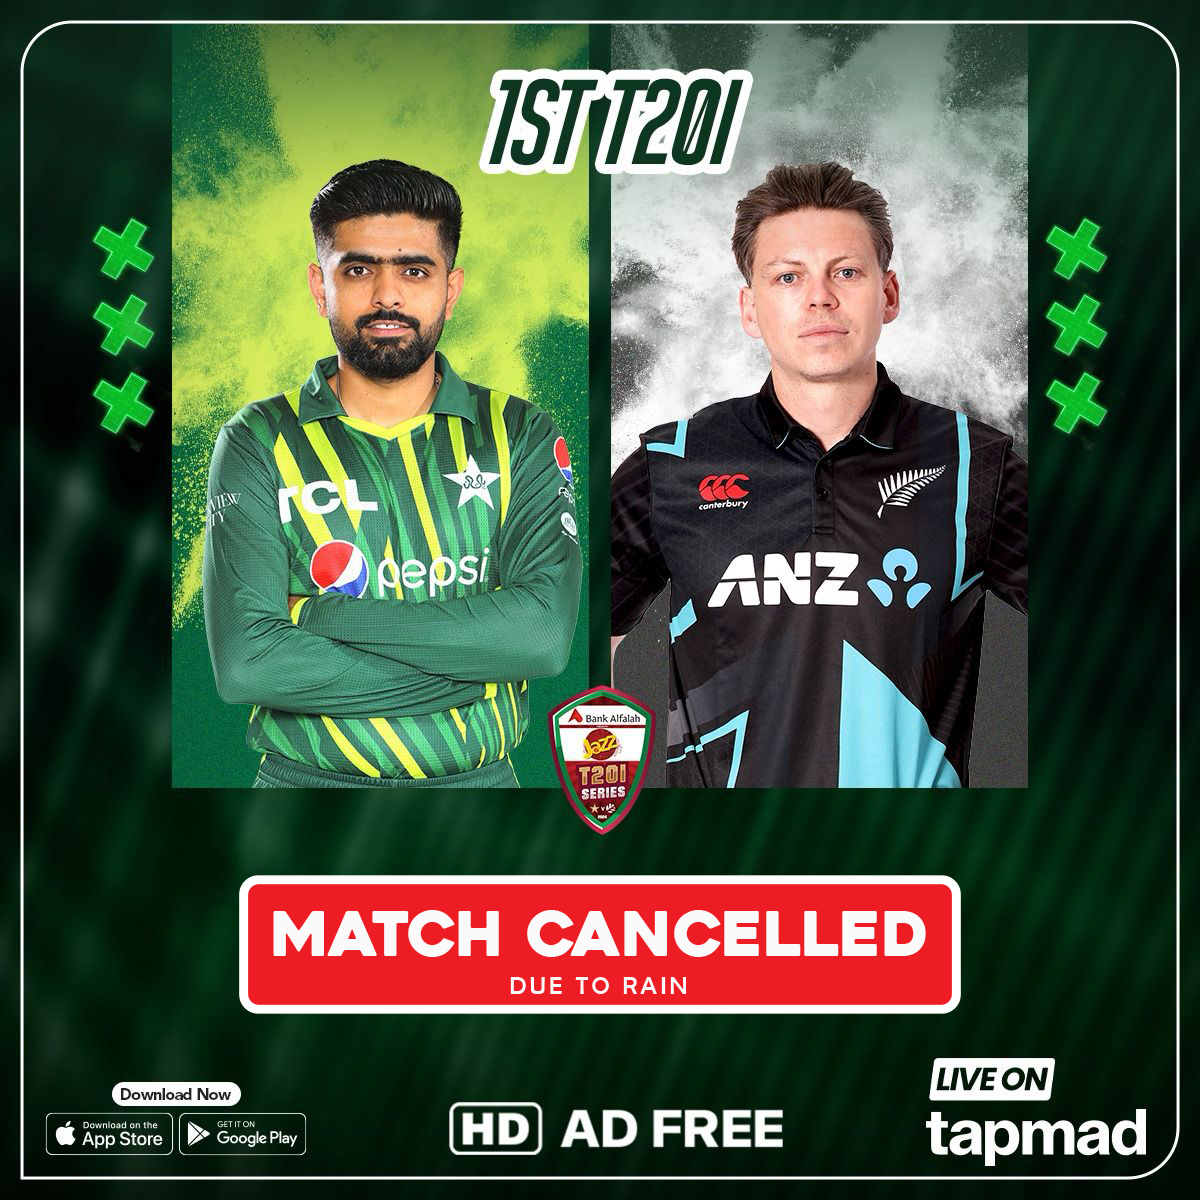 Rain plays spoil sports in Pindi, first match ends with just 2 balls played 🌧️ #PAKvNZ | #HojaoAdFree | #tapmad